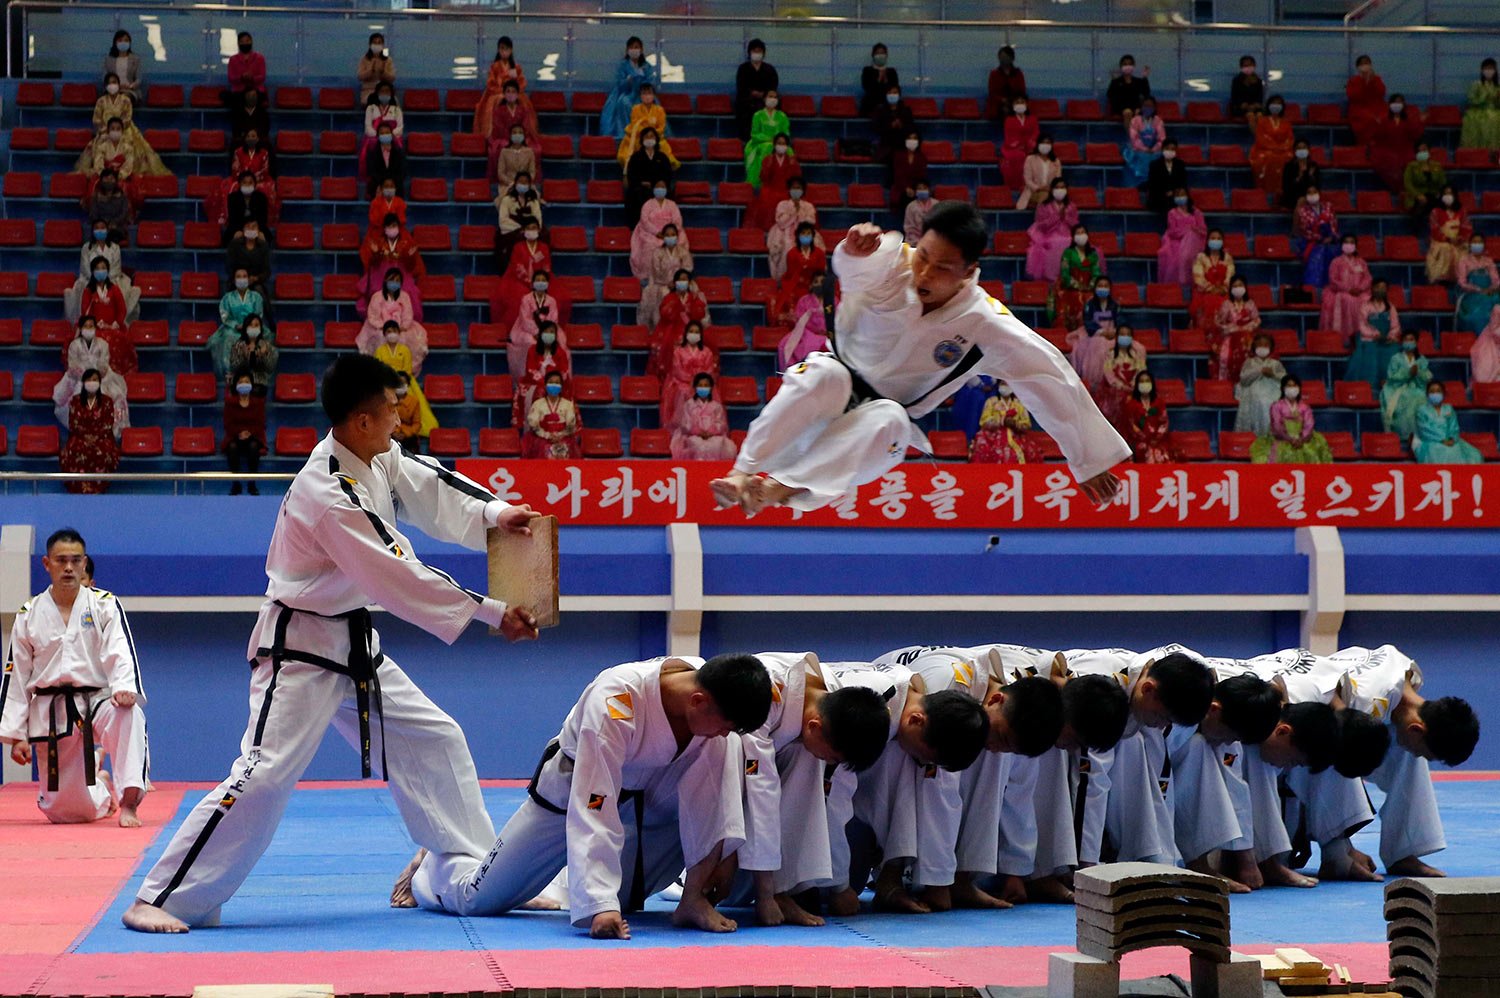  Players of the Taekwon-Do Team of the Korean Taekwon-Do Committee show a demonstration after the opening ceremony of Mangyongdae Prize National Martial Art Championship to mark the birth anniversary of former North Korean leader President Kim Il Sun